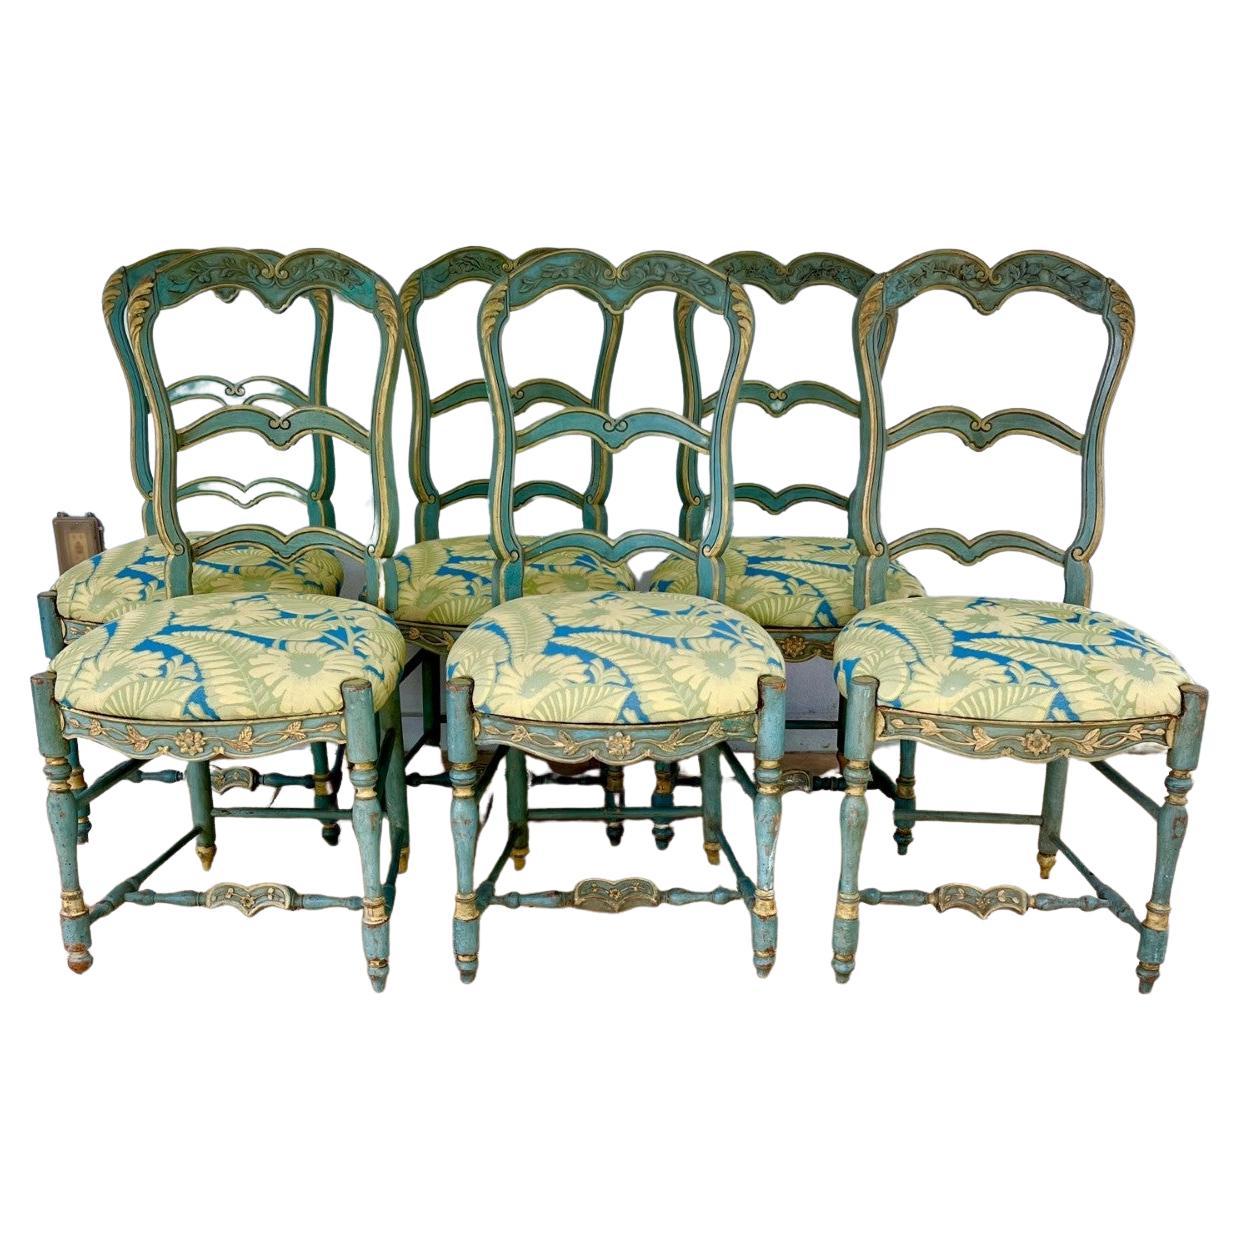 Six French country ladderback painted dining chairs early 19th century.

Superb quality set of 6 antique French Louis XV Baroque style carved fruit wood provincial ladderback dining chairs. The top rail has a finely carved floral motif which also